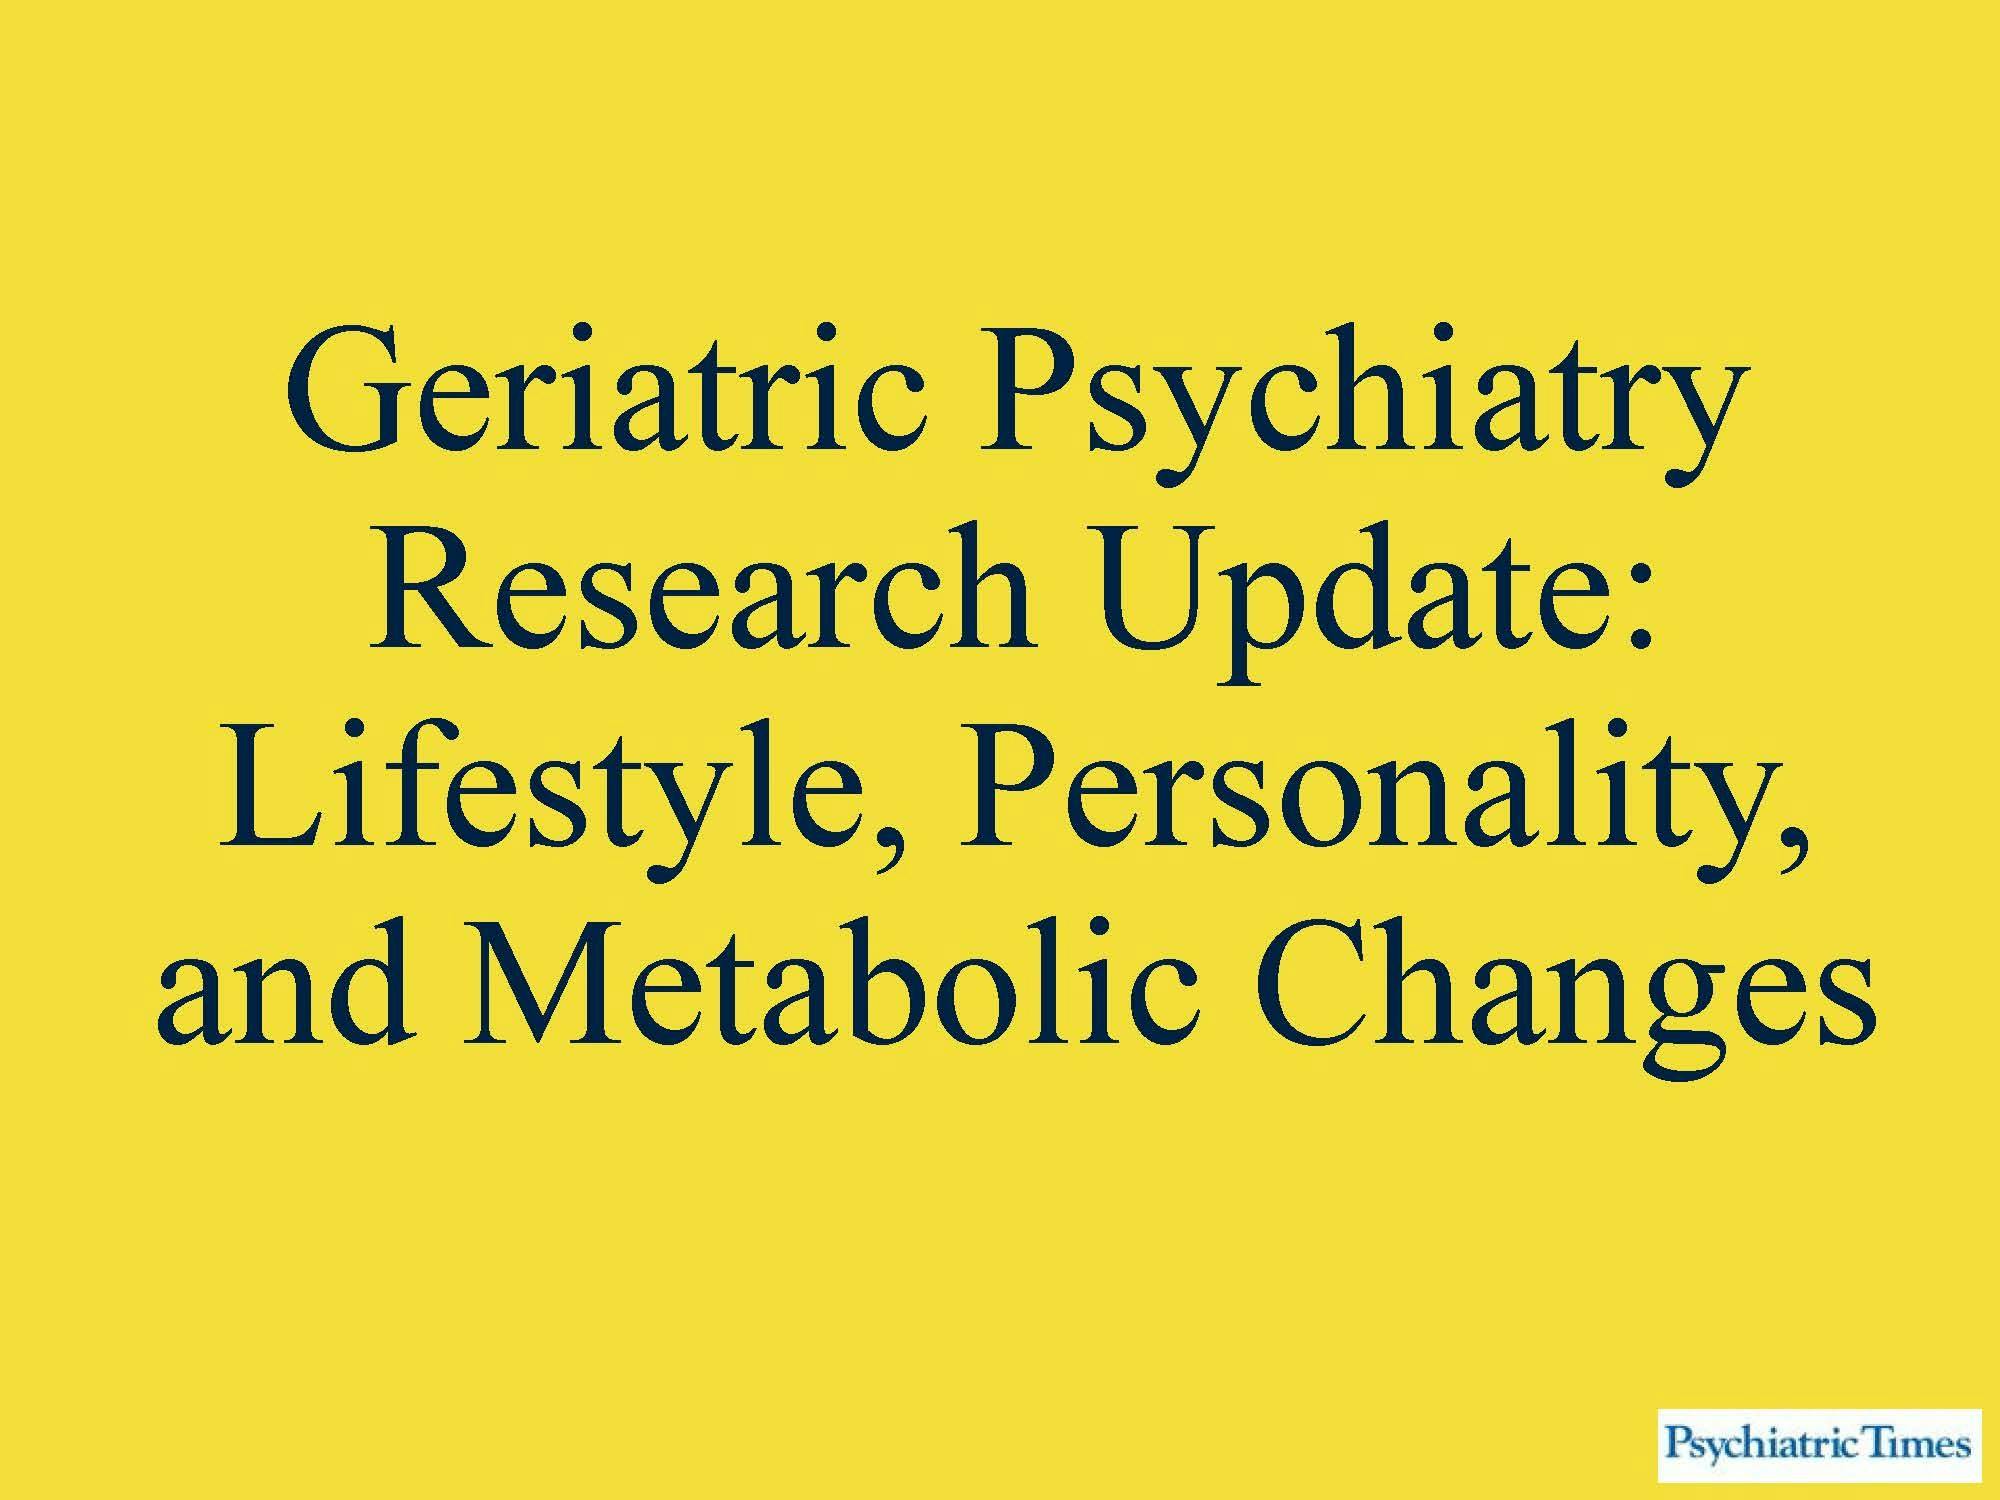 Lifestyle, Personality, and Metabolic Changes in the Elderly